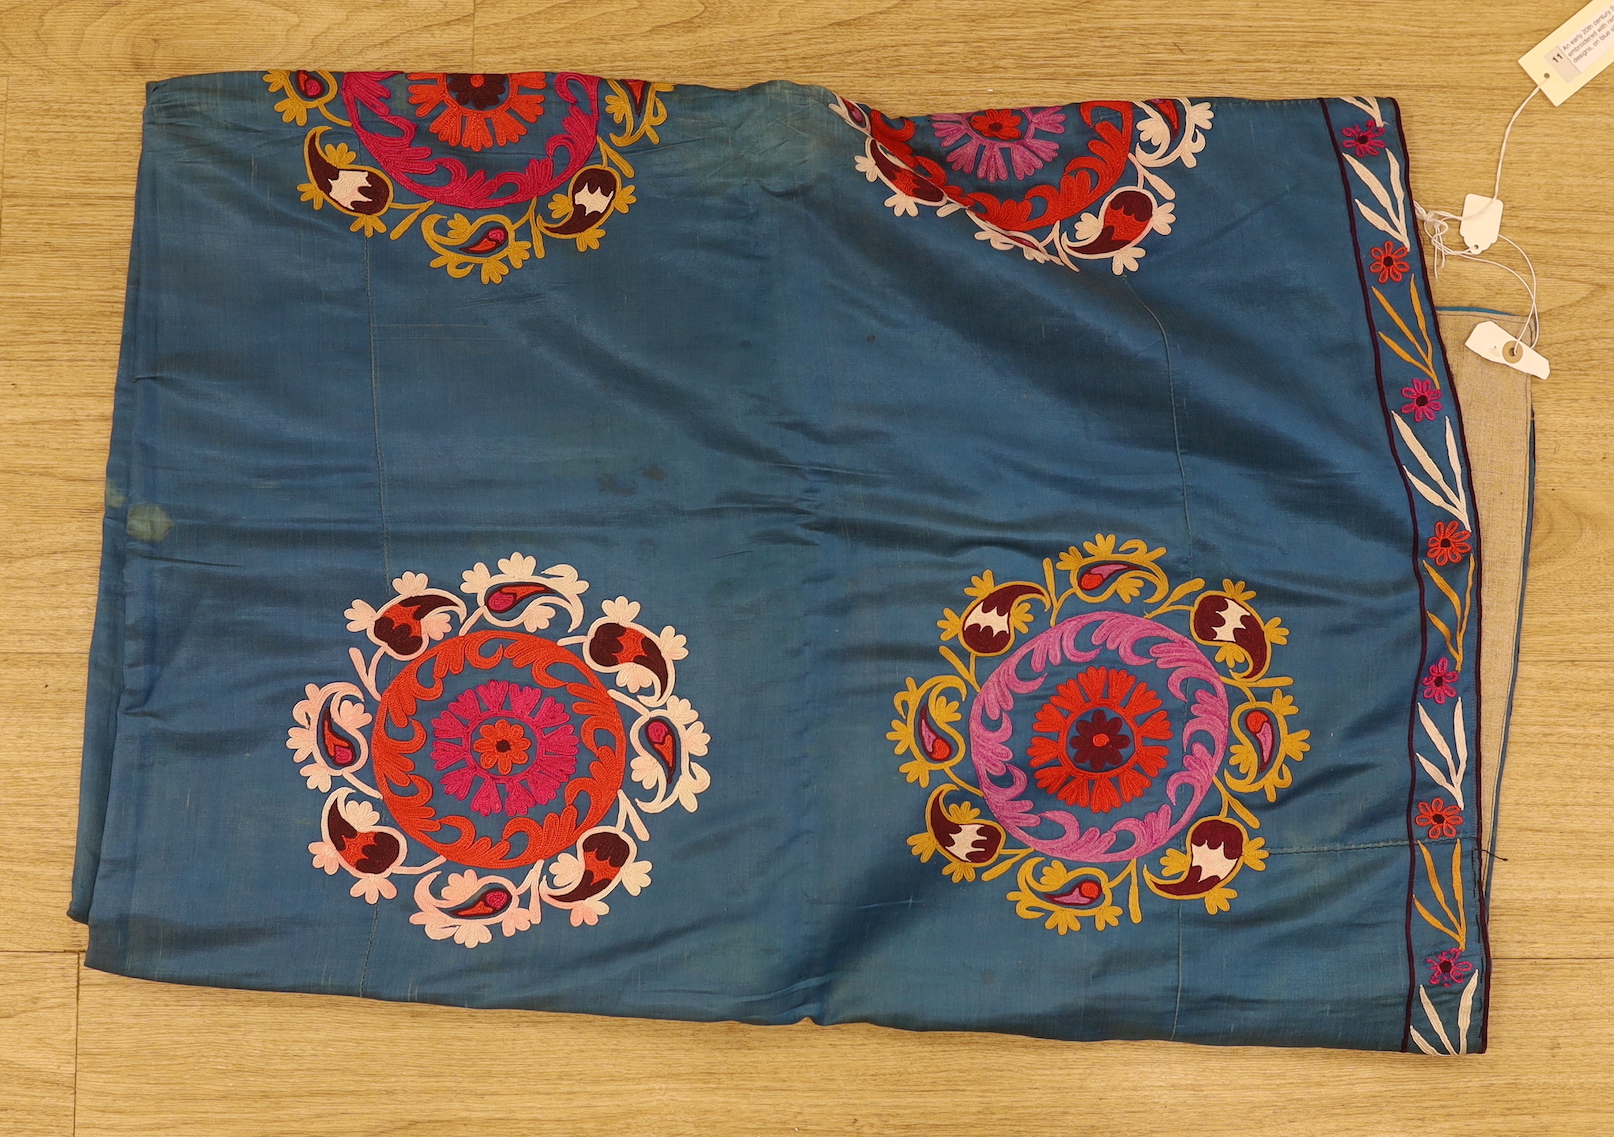 An early 20th century Suzani hanging, embroidered with red pink and gold foliate designs, on blue silk ground, 210 x 160cm